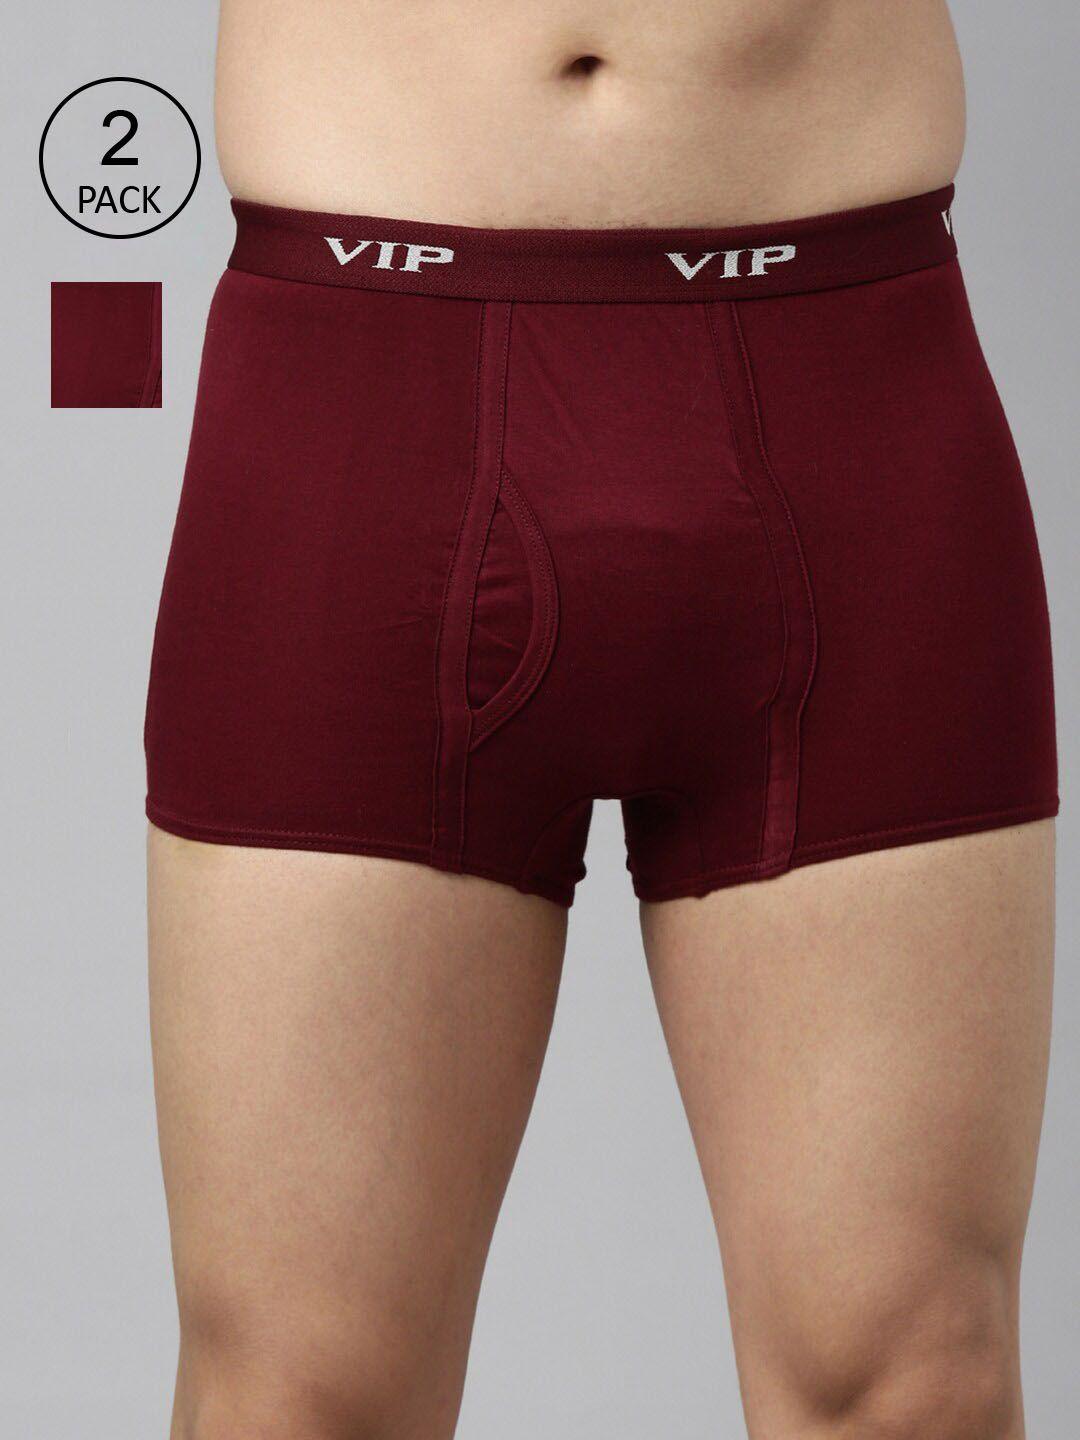 vip men pack of 2 assorted pure cotton long trunks punchp_110